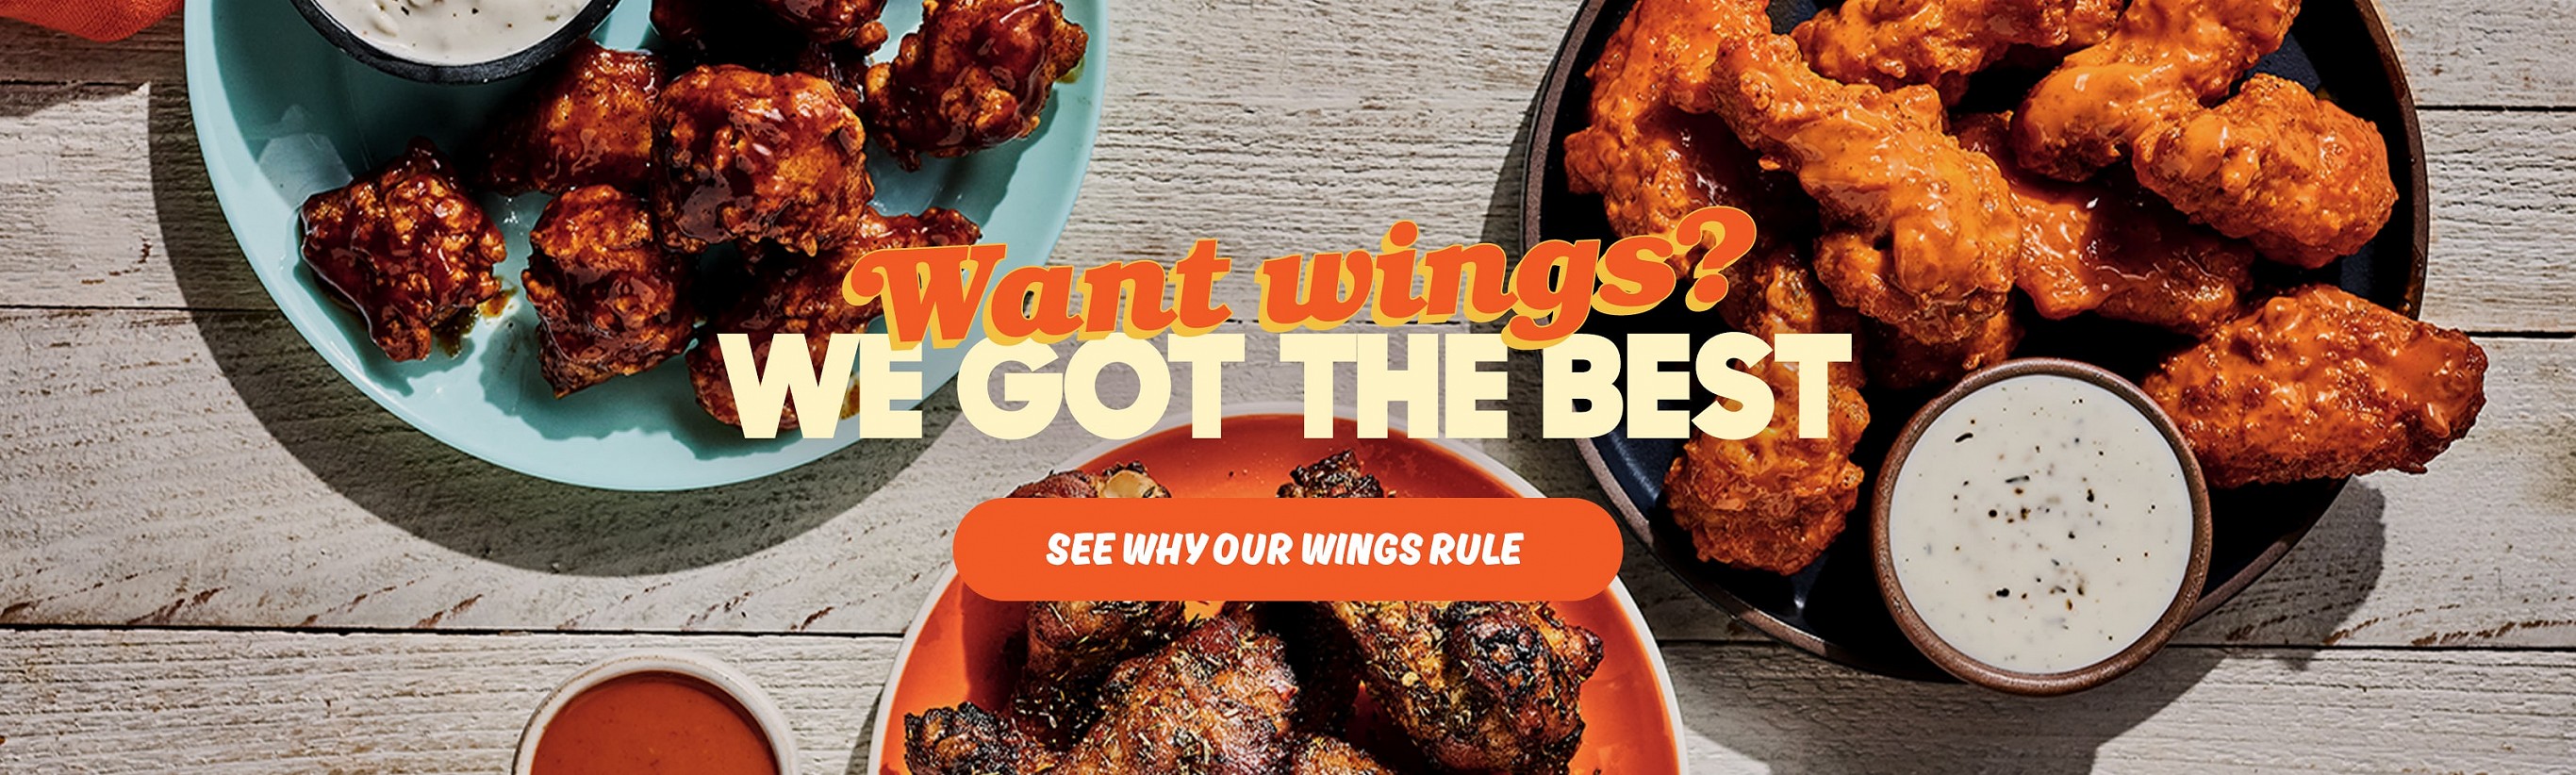 Want Wings? We Got The Best - See Why Our Wings Rule